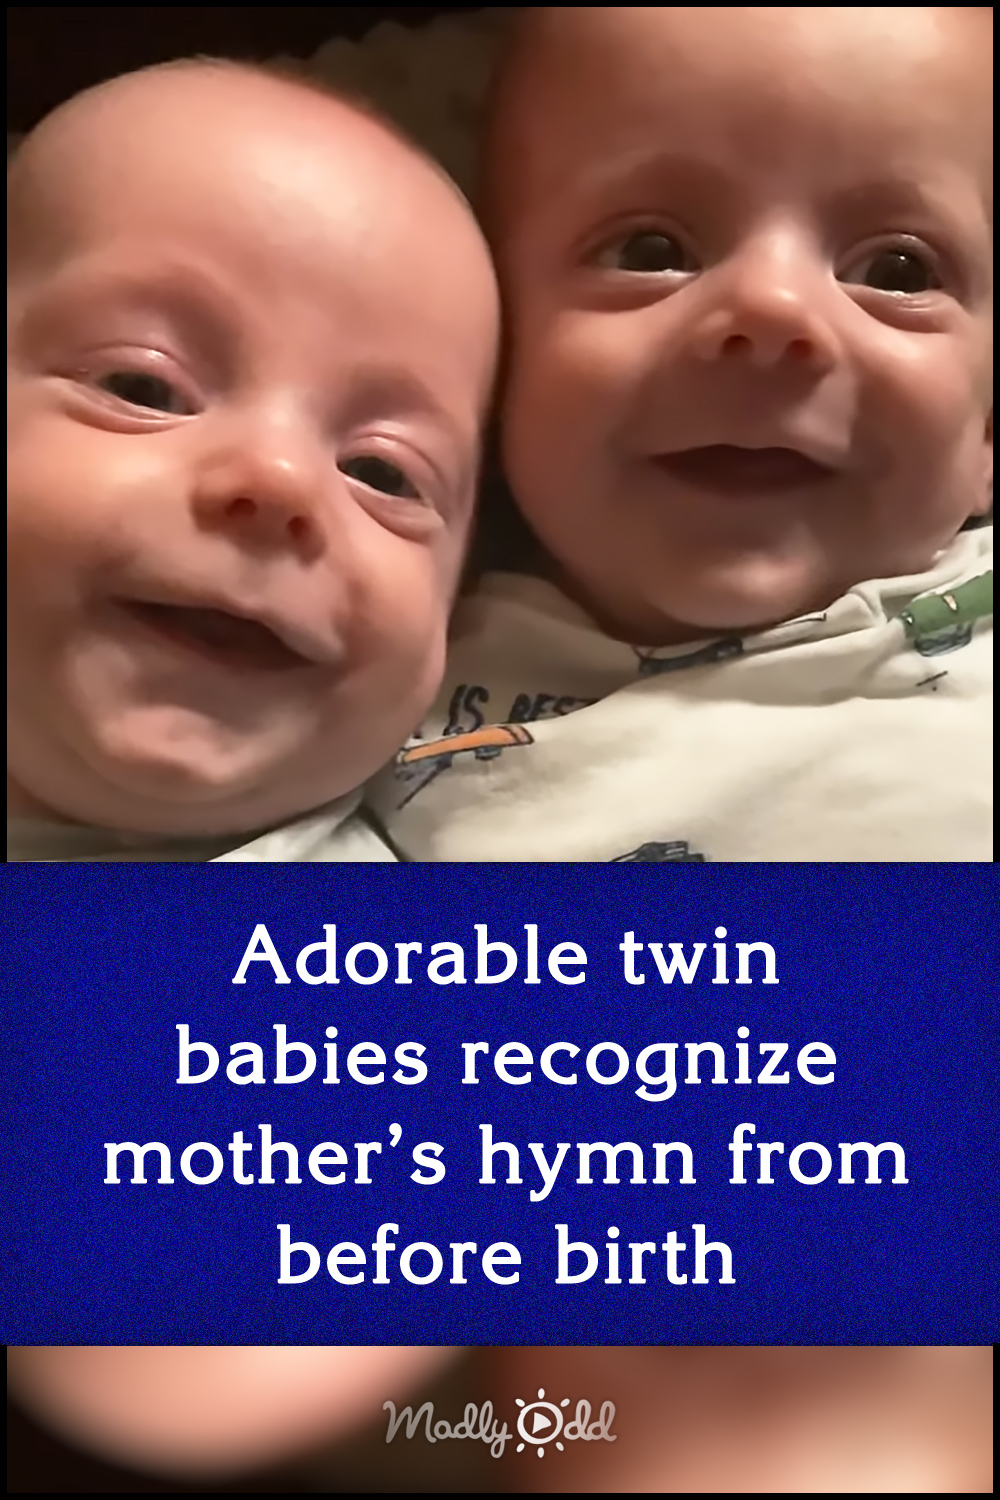 Adorable twin babies recognize mother’s hymn from before birth